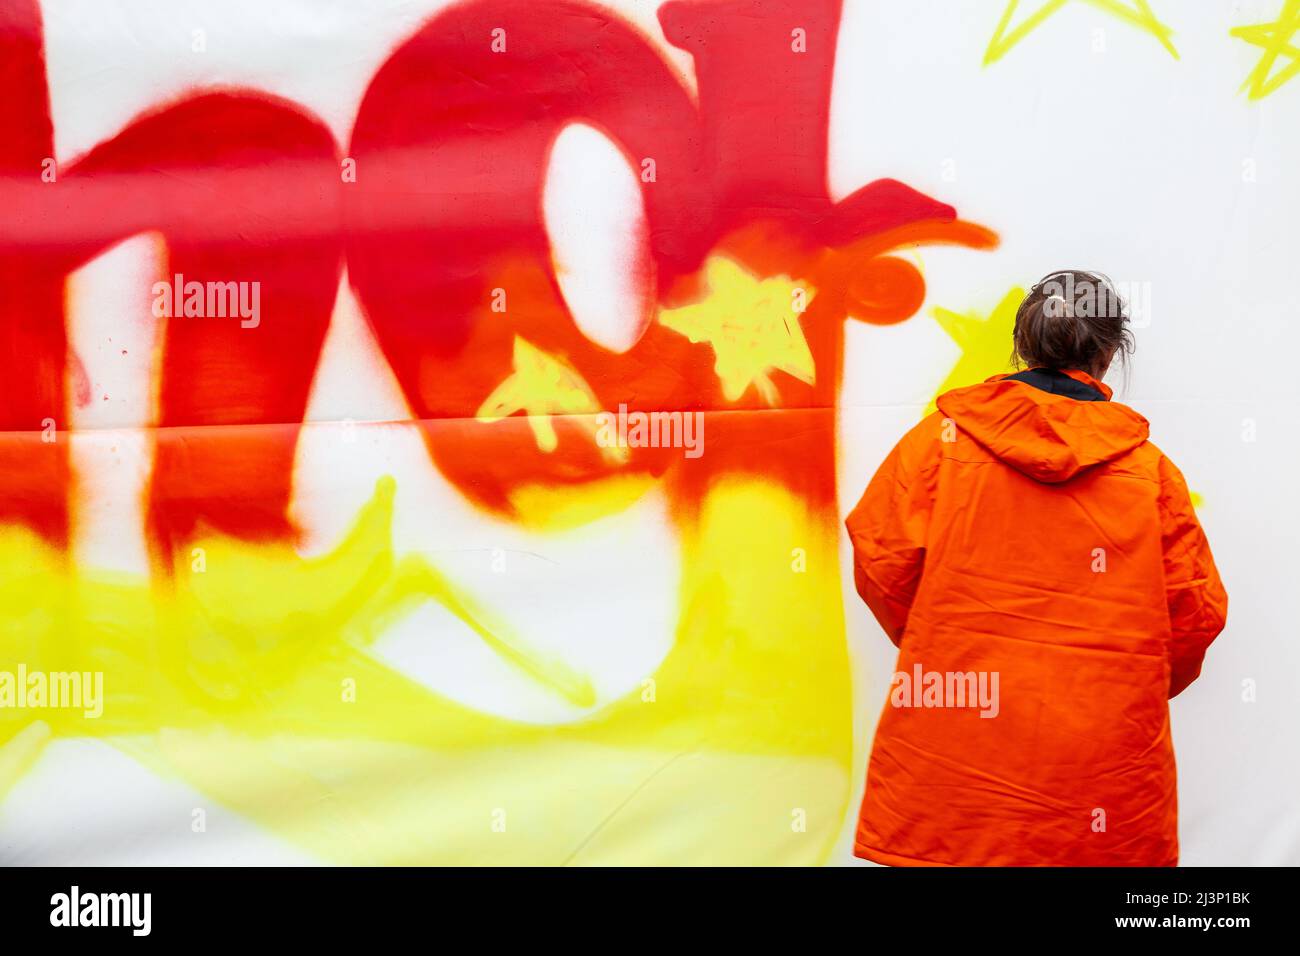 Lady dressed in an orange rain coat tagging a canvas in orange and yellow. Brussels Stock Photo